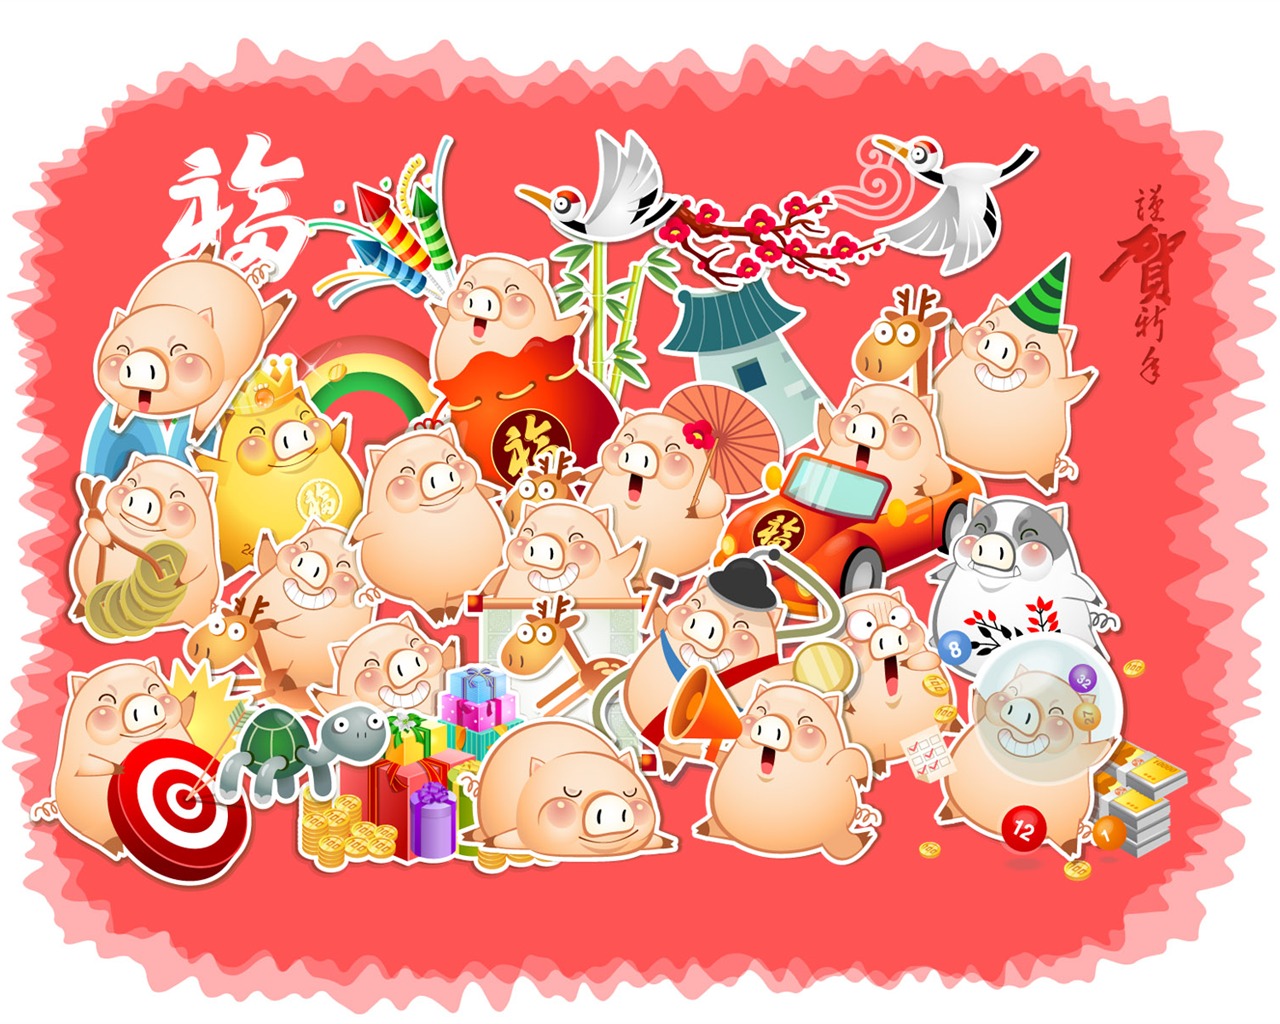 Year of the Pig Theme Wallpaper #11 - 1280x1024